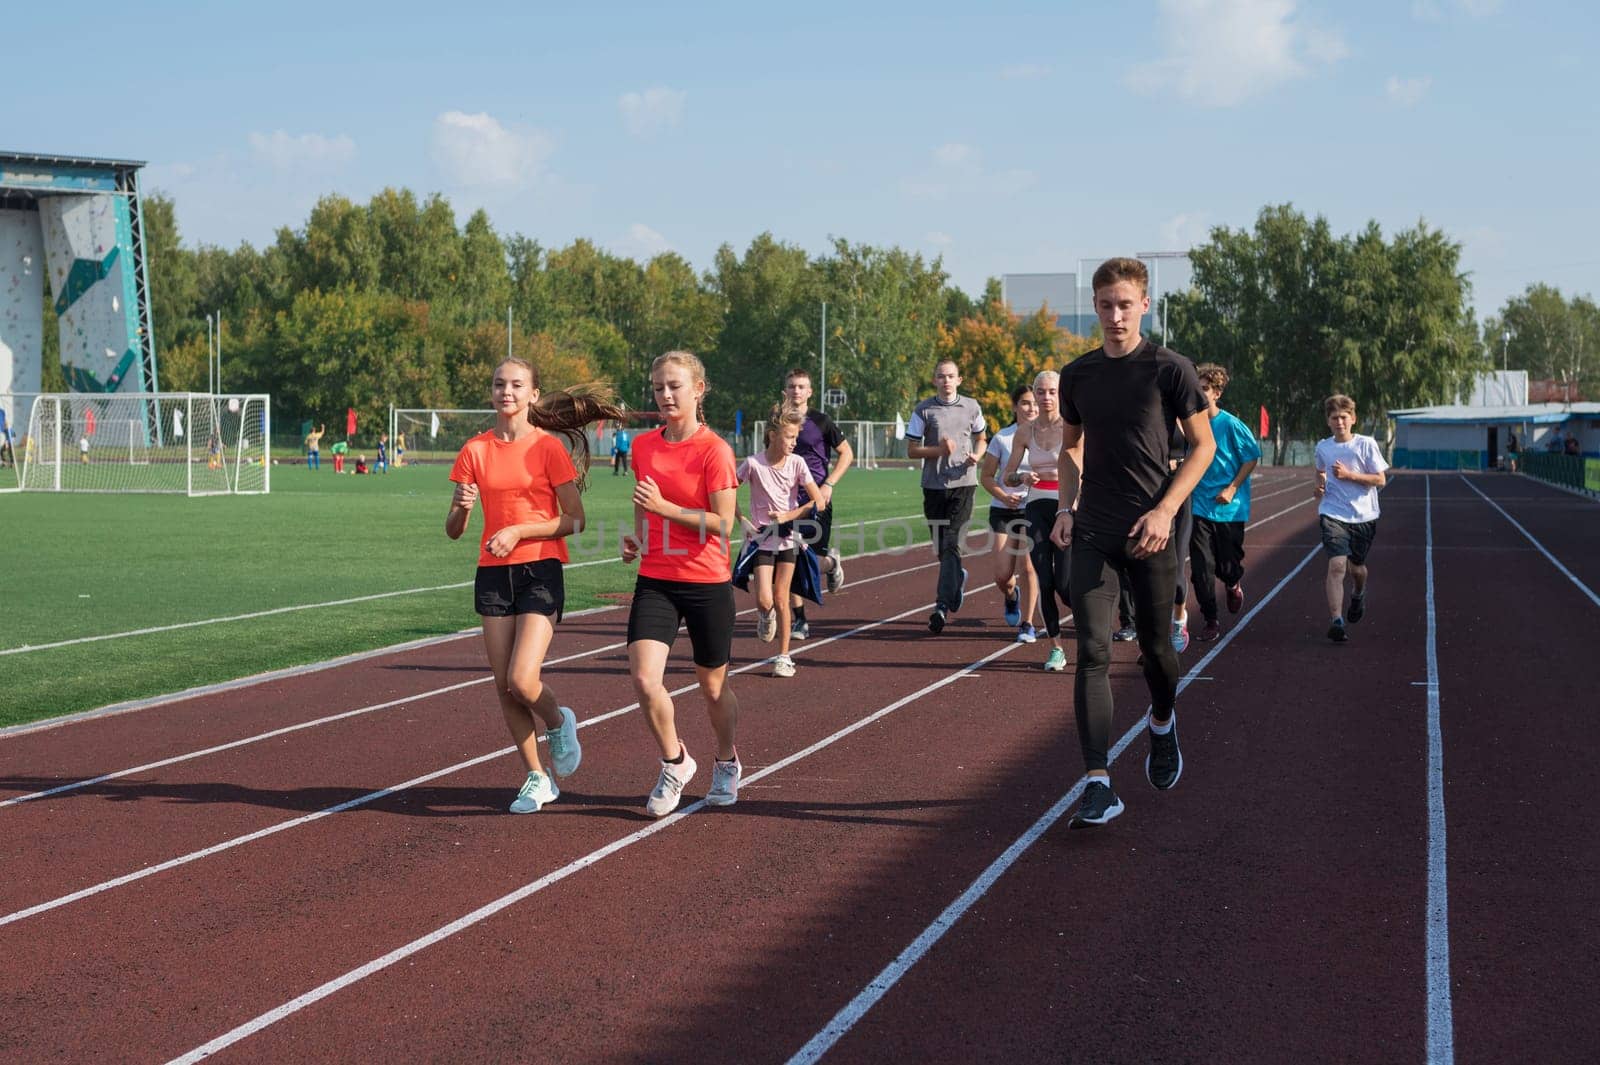 Group of young athlete runnner are training by rusak